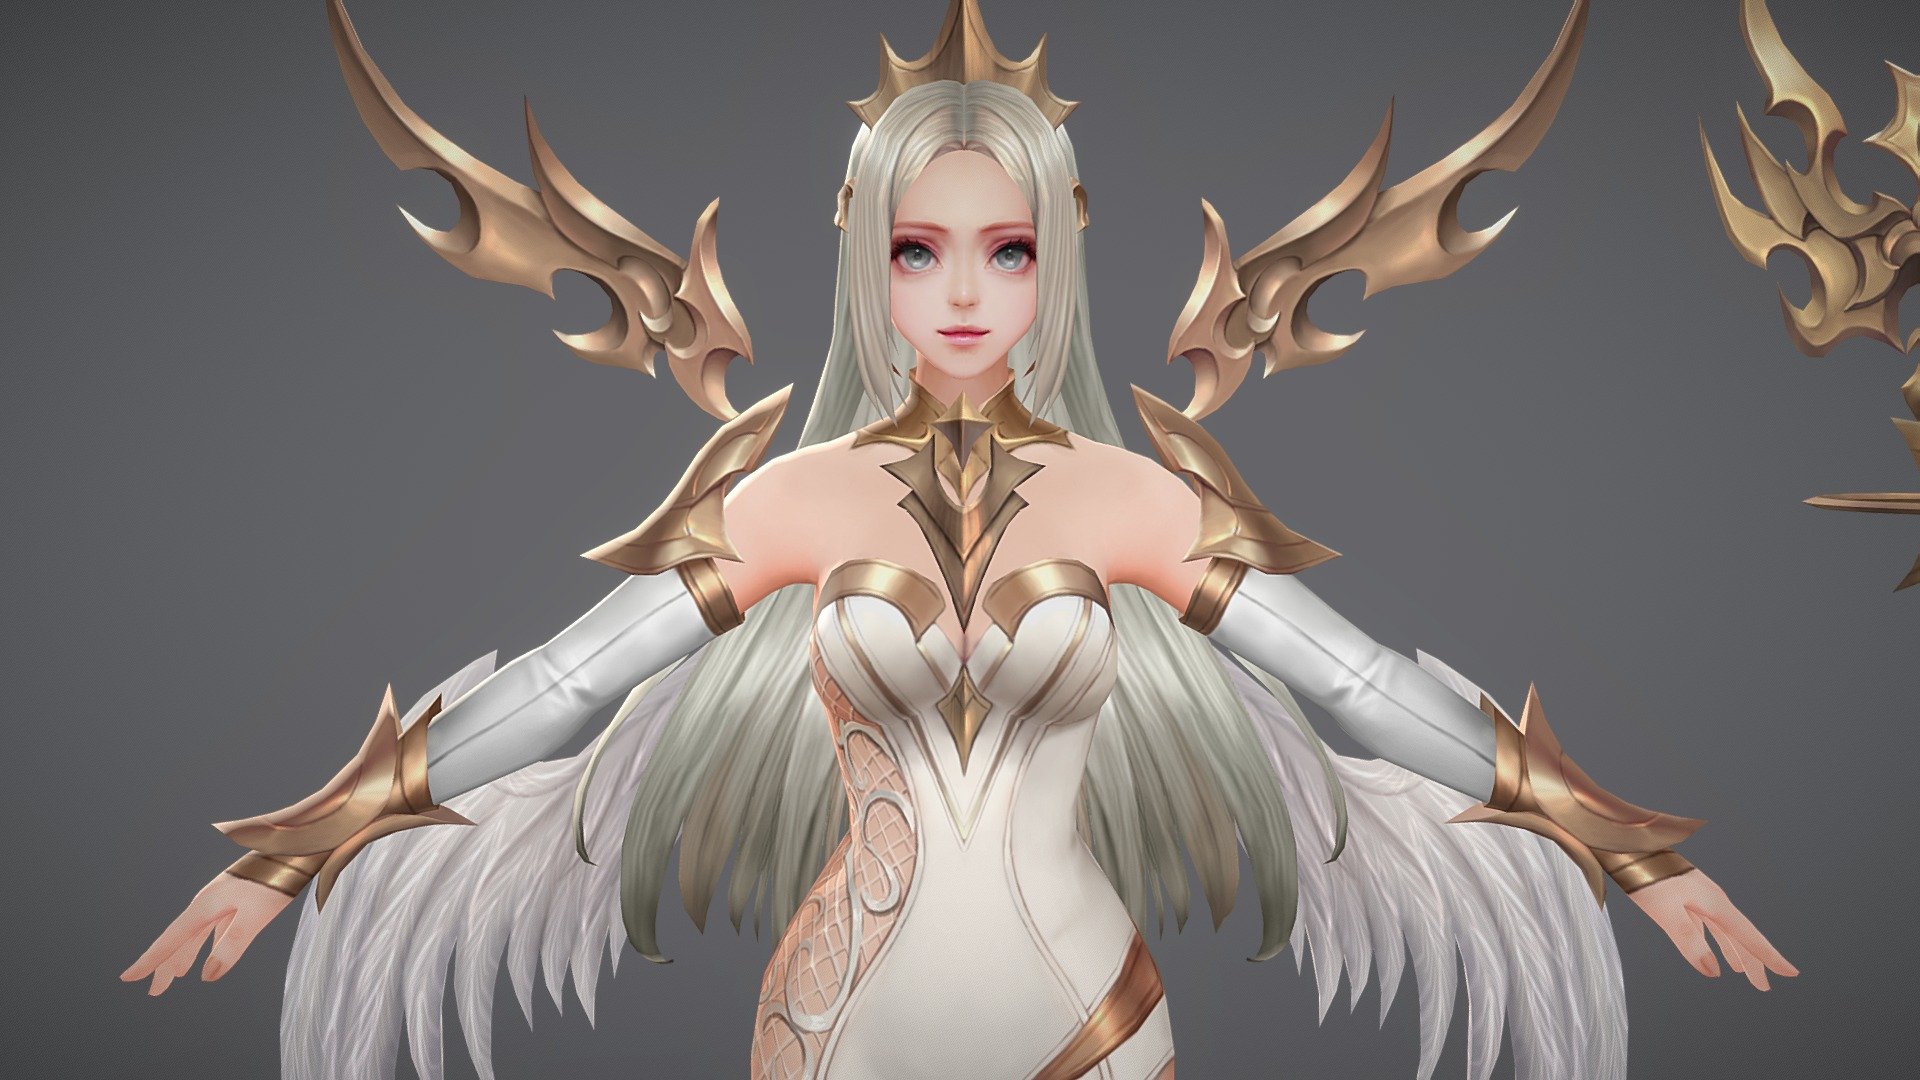 Hello

I worked on goddess modeling and texturing in the DragonSky project. You may refer to the modeling, but commercial use is not allowed.
Thank you.

안녕하세요.

저는 드래곤스카이 프로젝트에서 여신의 모델링과 텍스처링을 했습니다.
모델링을 참고하실 수는 있지만, 상업적 사용은 허용되지 않습니다.
감사합니다.

ⓒ 2018. (NovaCore) all rights reserved 3d model